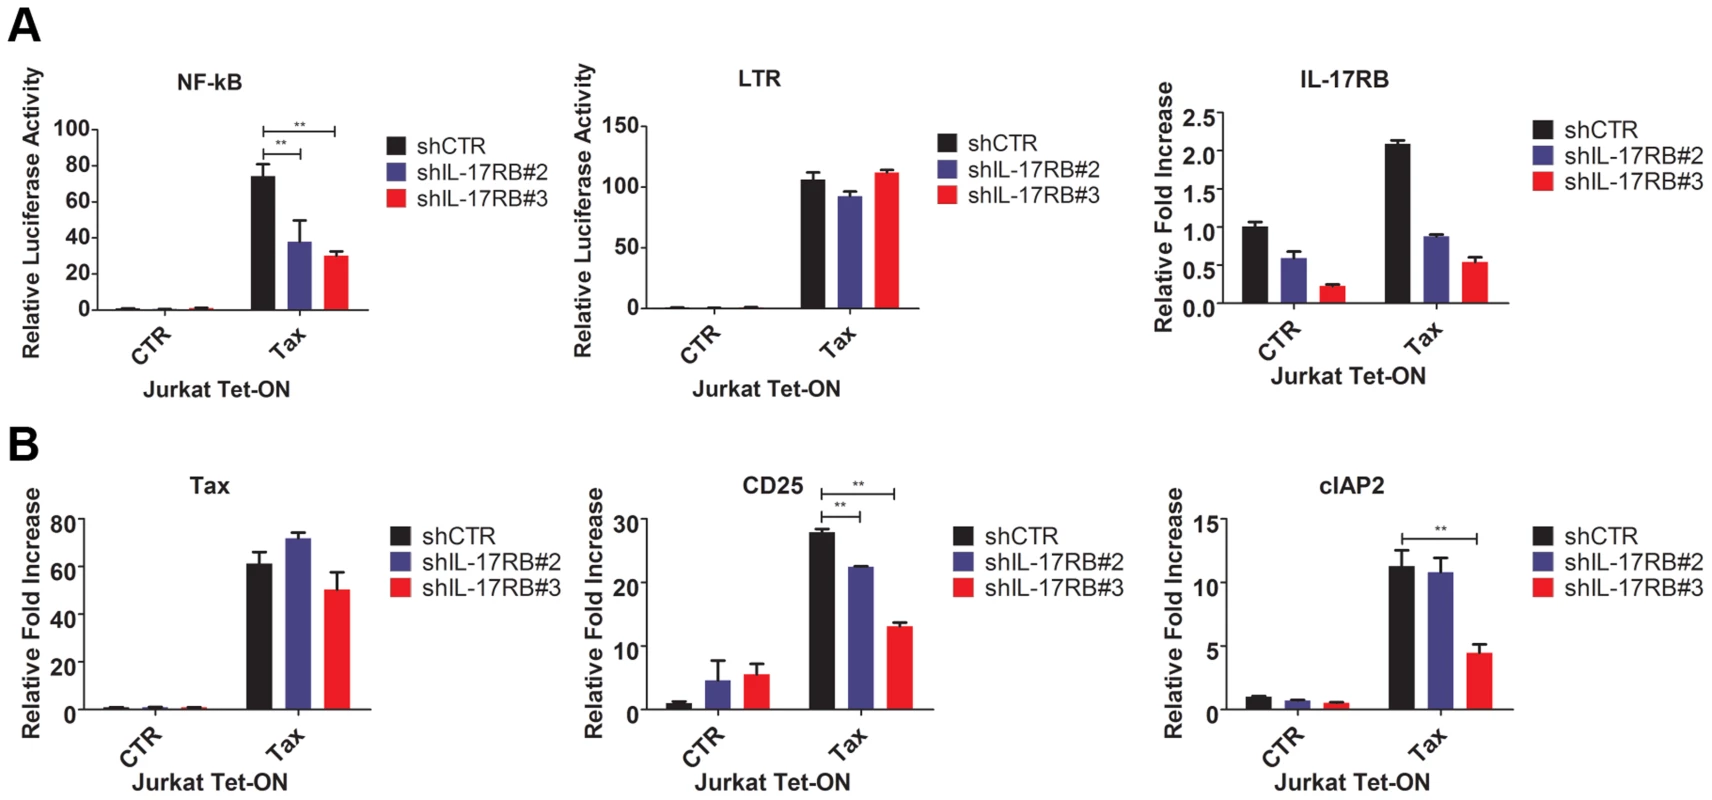 Tax requires IL-17RB for NF-κB activation in T cells.